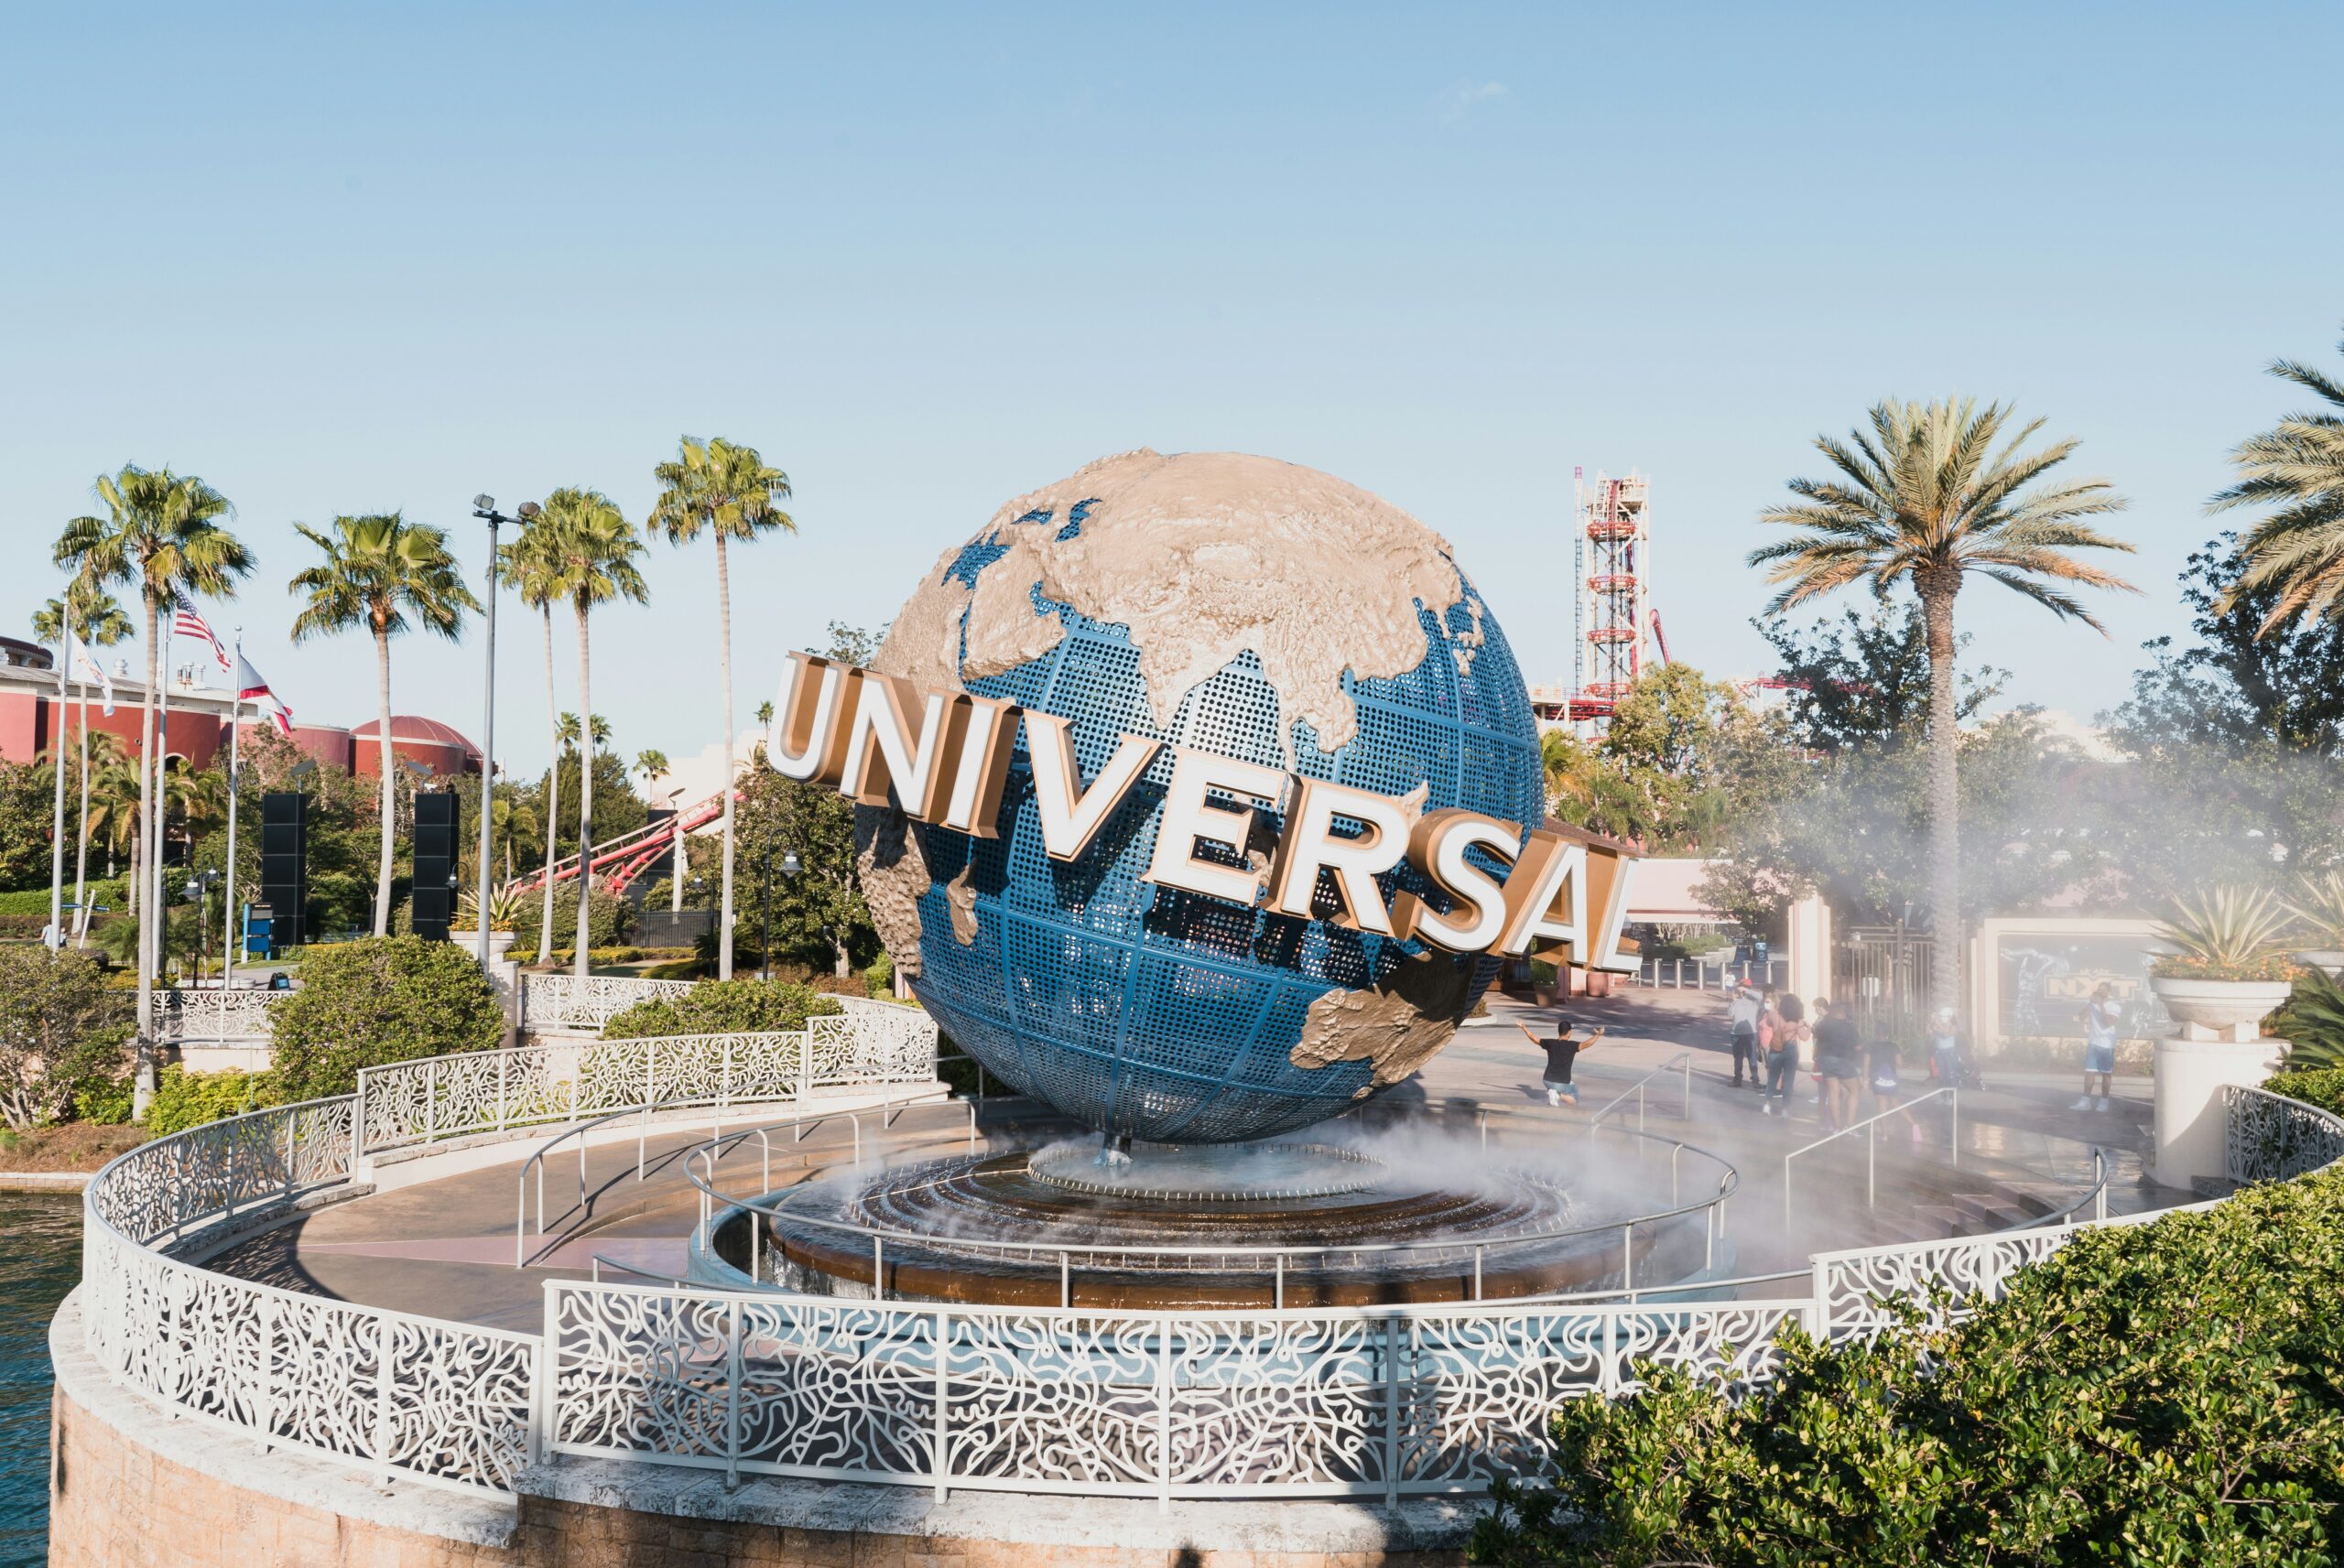 Visit your favorite theme park any day of the week in this Florida city. Orlando is a great place for LGBTQ young and families, as it's one of the most affordable gay-friendly cities in the U.S. Take advantage of this family oriented city, where young professionals can also thrive. Pictured: The entrance of Universal Studios in Orlando, Florida